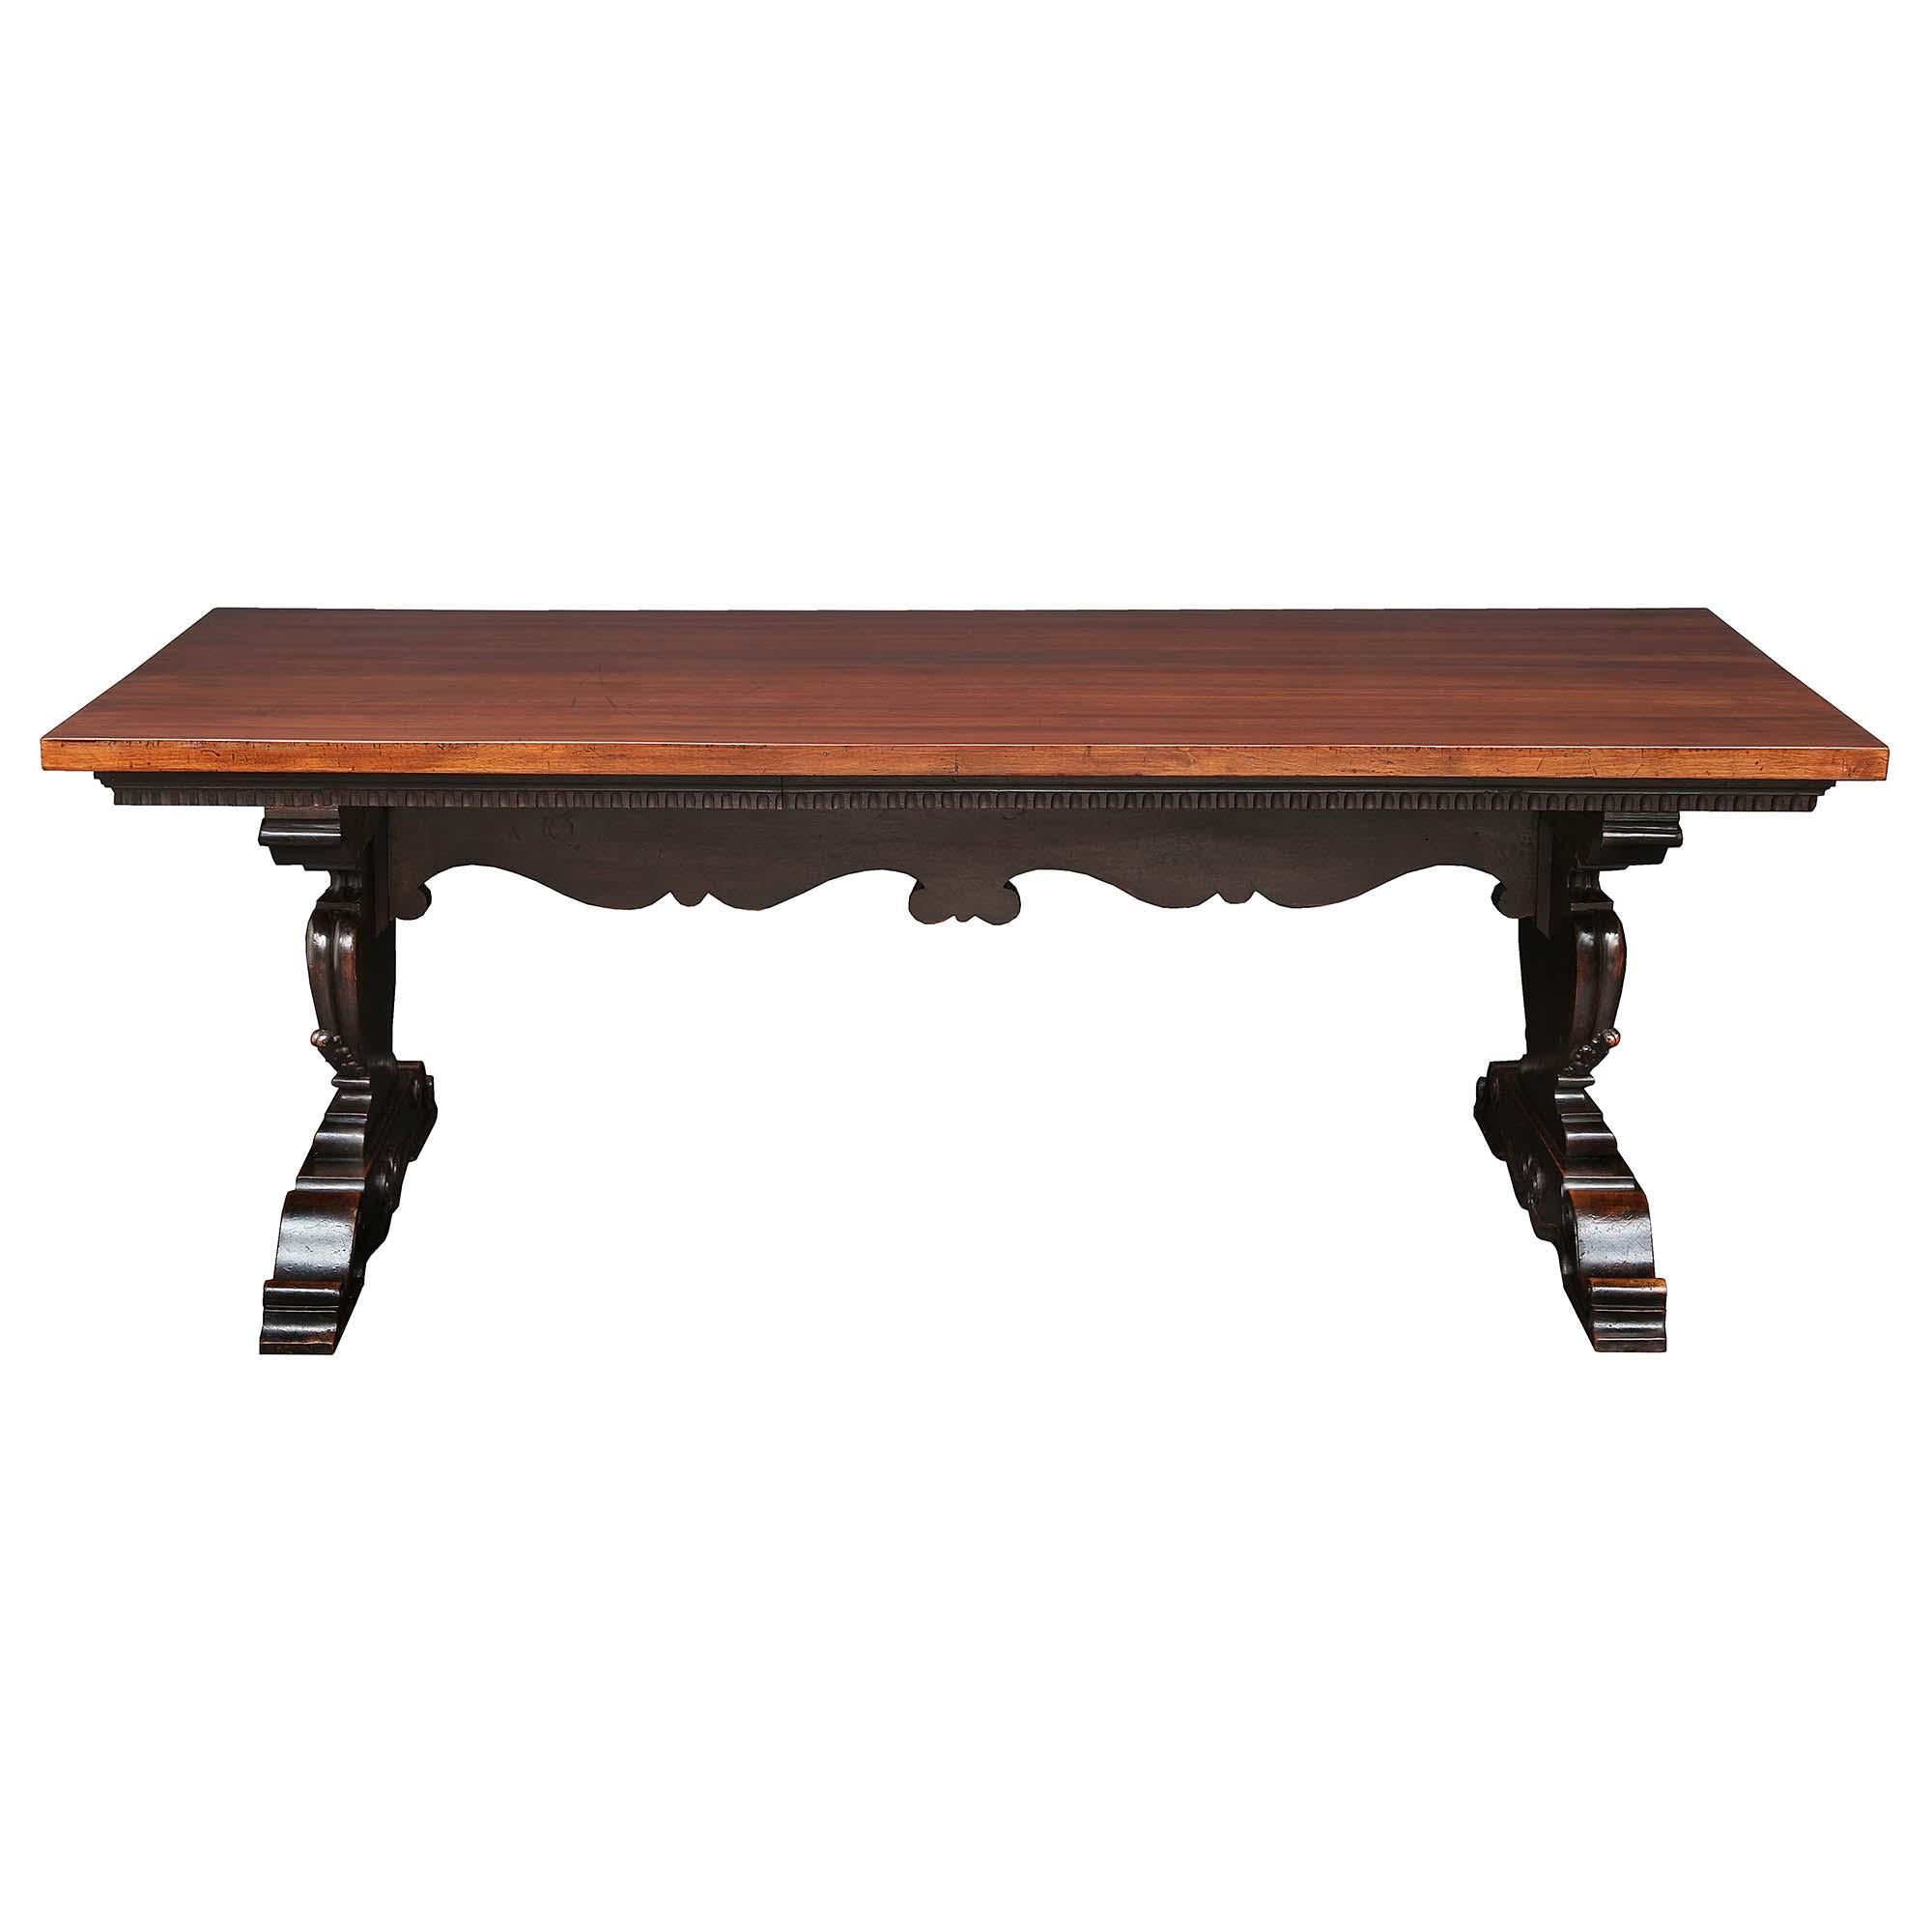 A handsome and large-scale Italian mid-19th-century solid walnut trestle table. The table is raised by extremely decorative carved supports displaying richly scrolled patterns with a floral and reeded design. At the center connecting the two